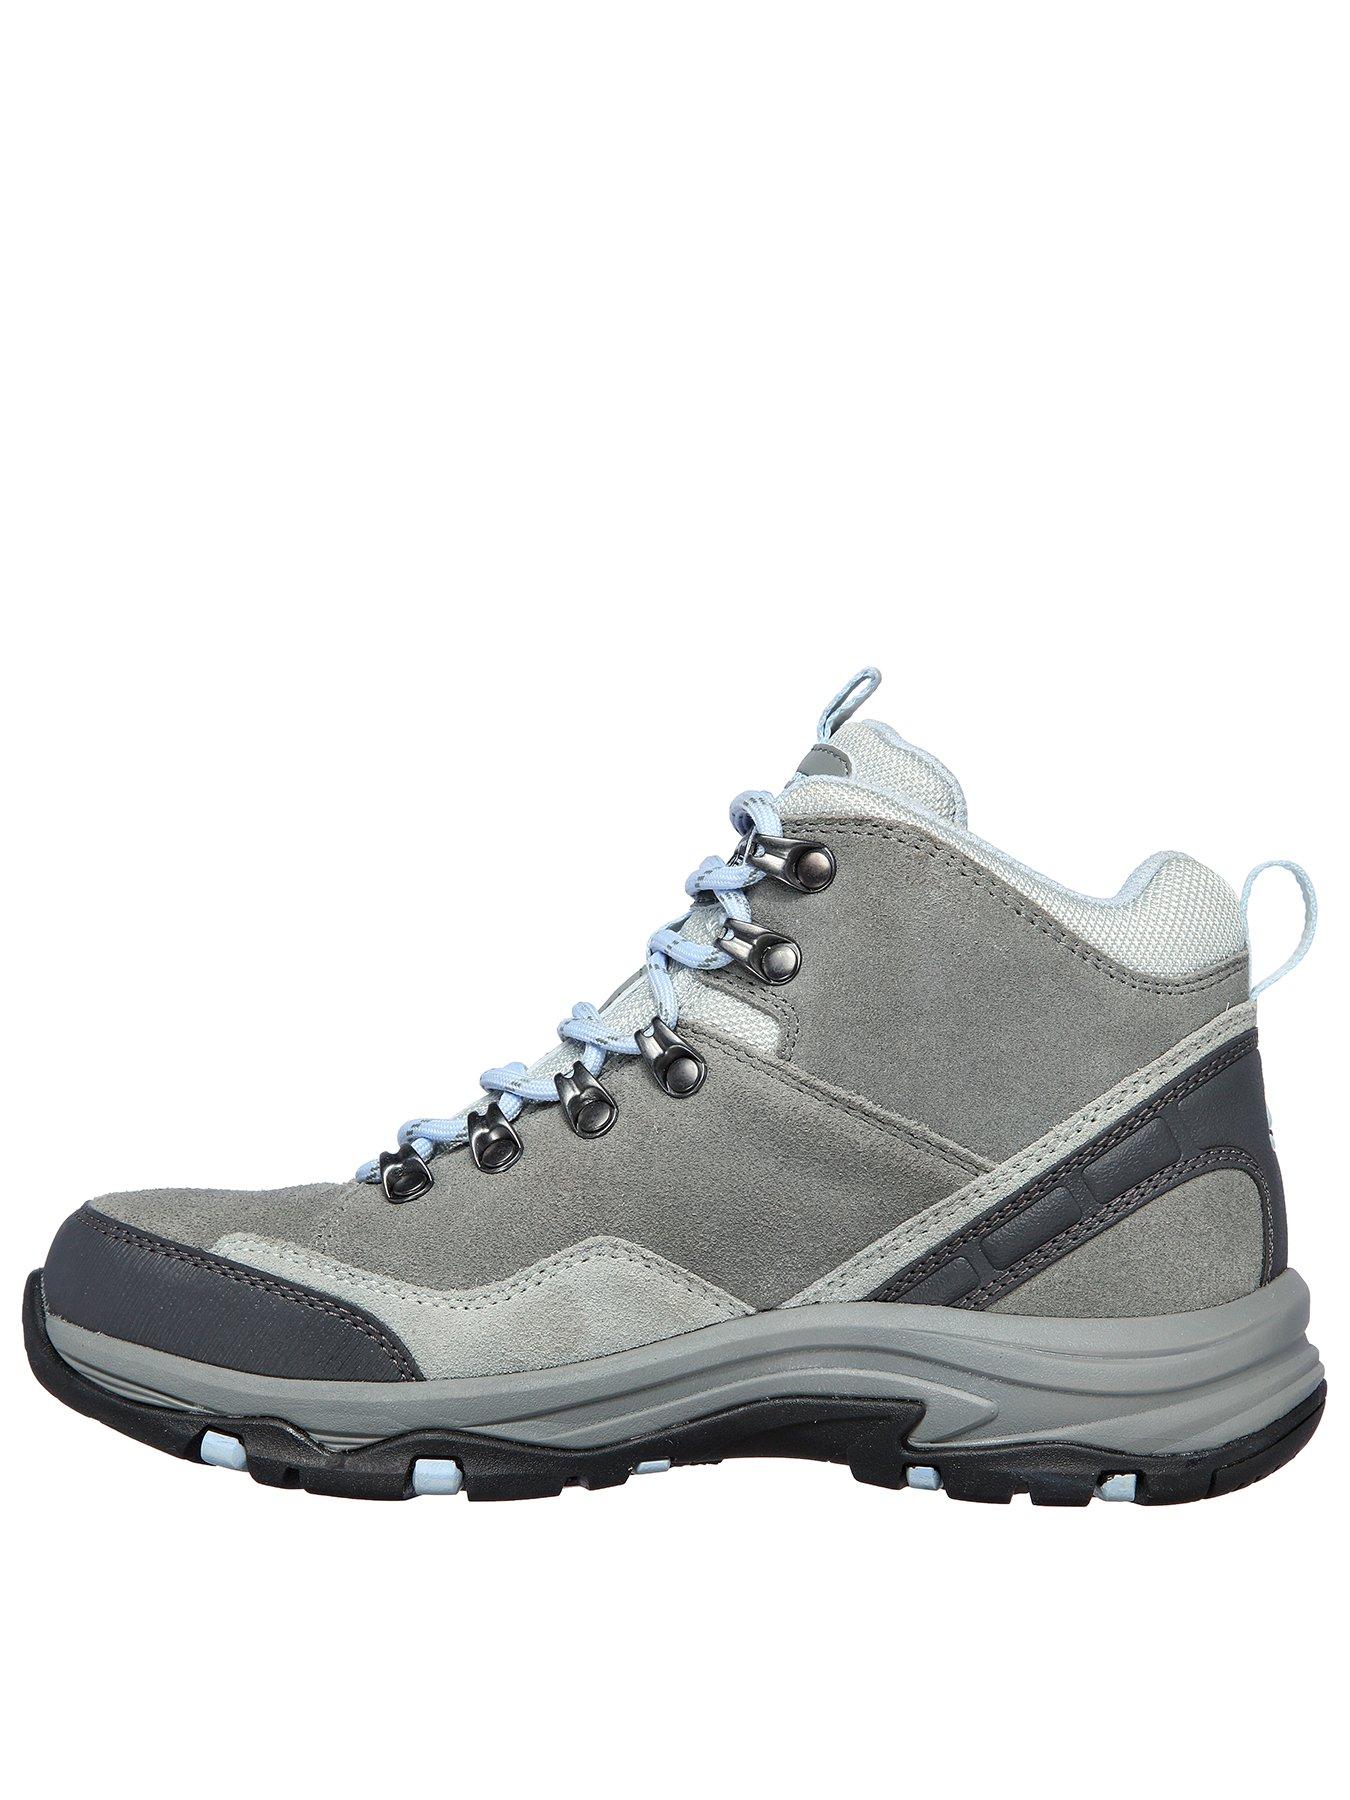  Trego Walking Boots